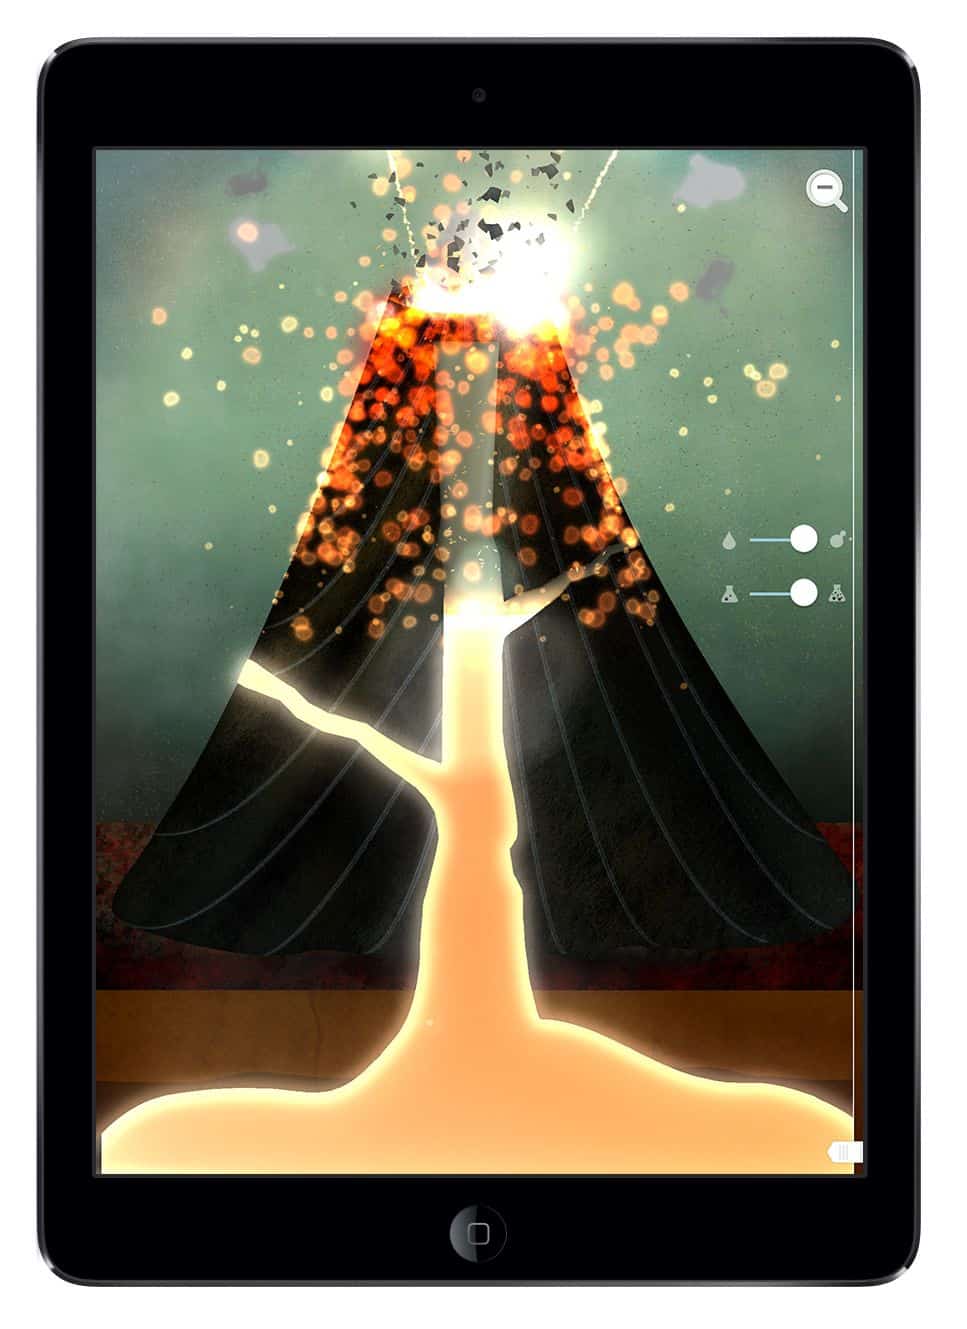 Gorgeous illustration of a volcanic eruption in The Earth mobile app on iPad.